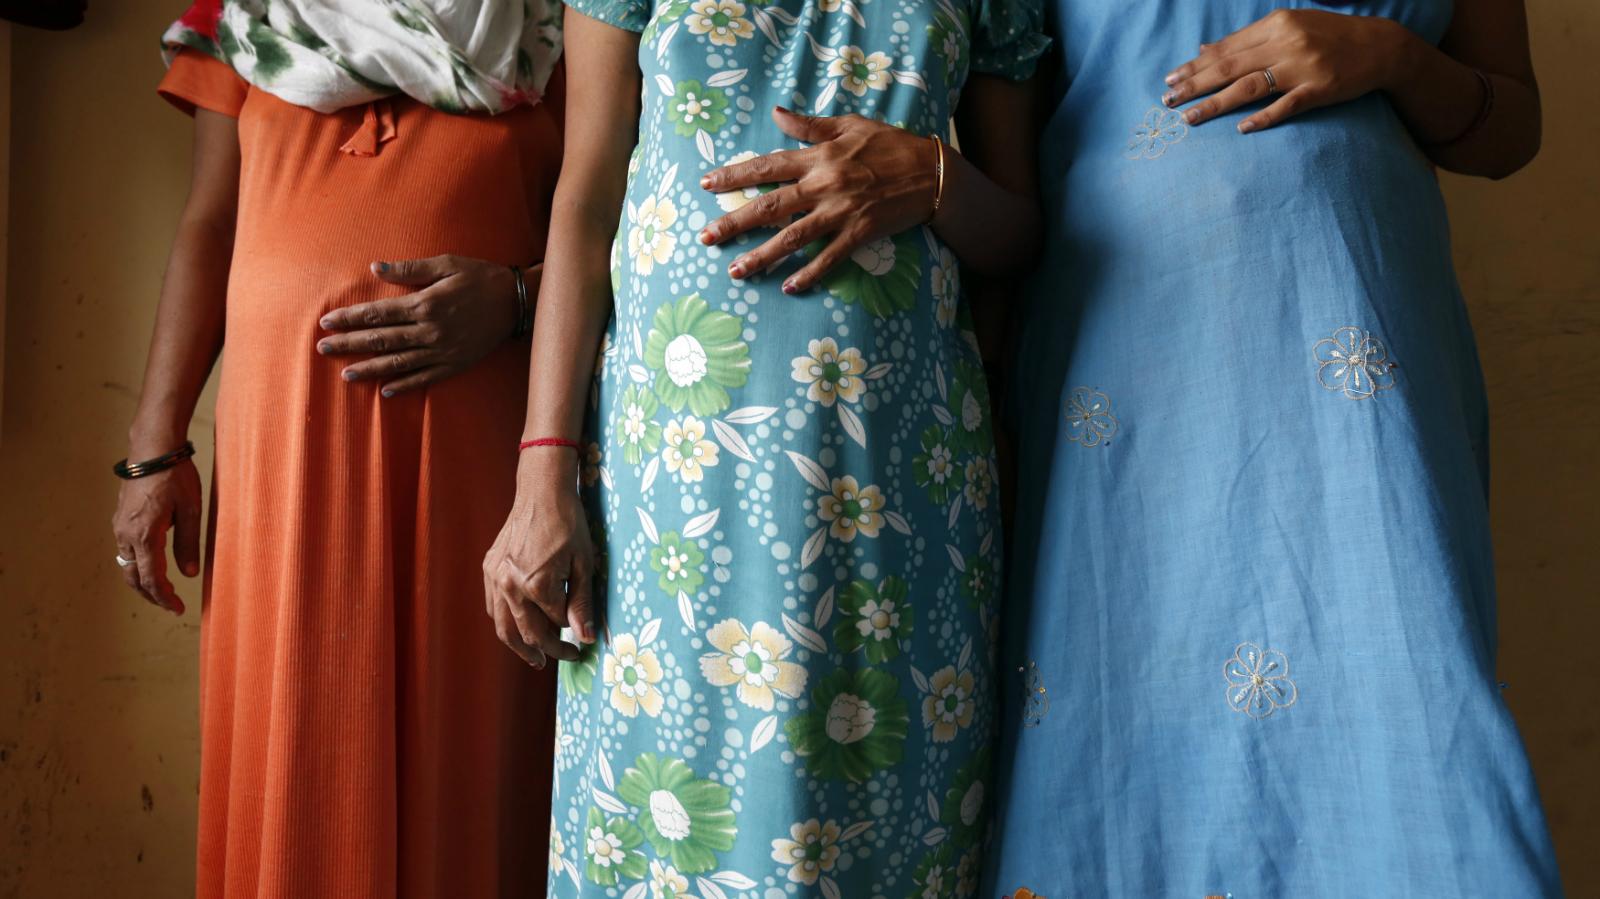 Indian women set to get right to abort pregnancy in 6th month